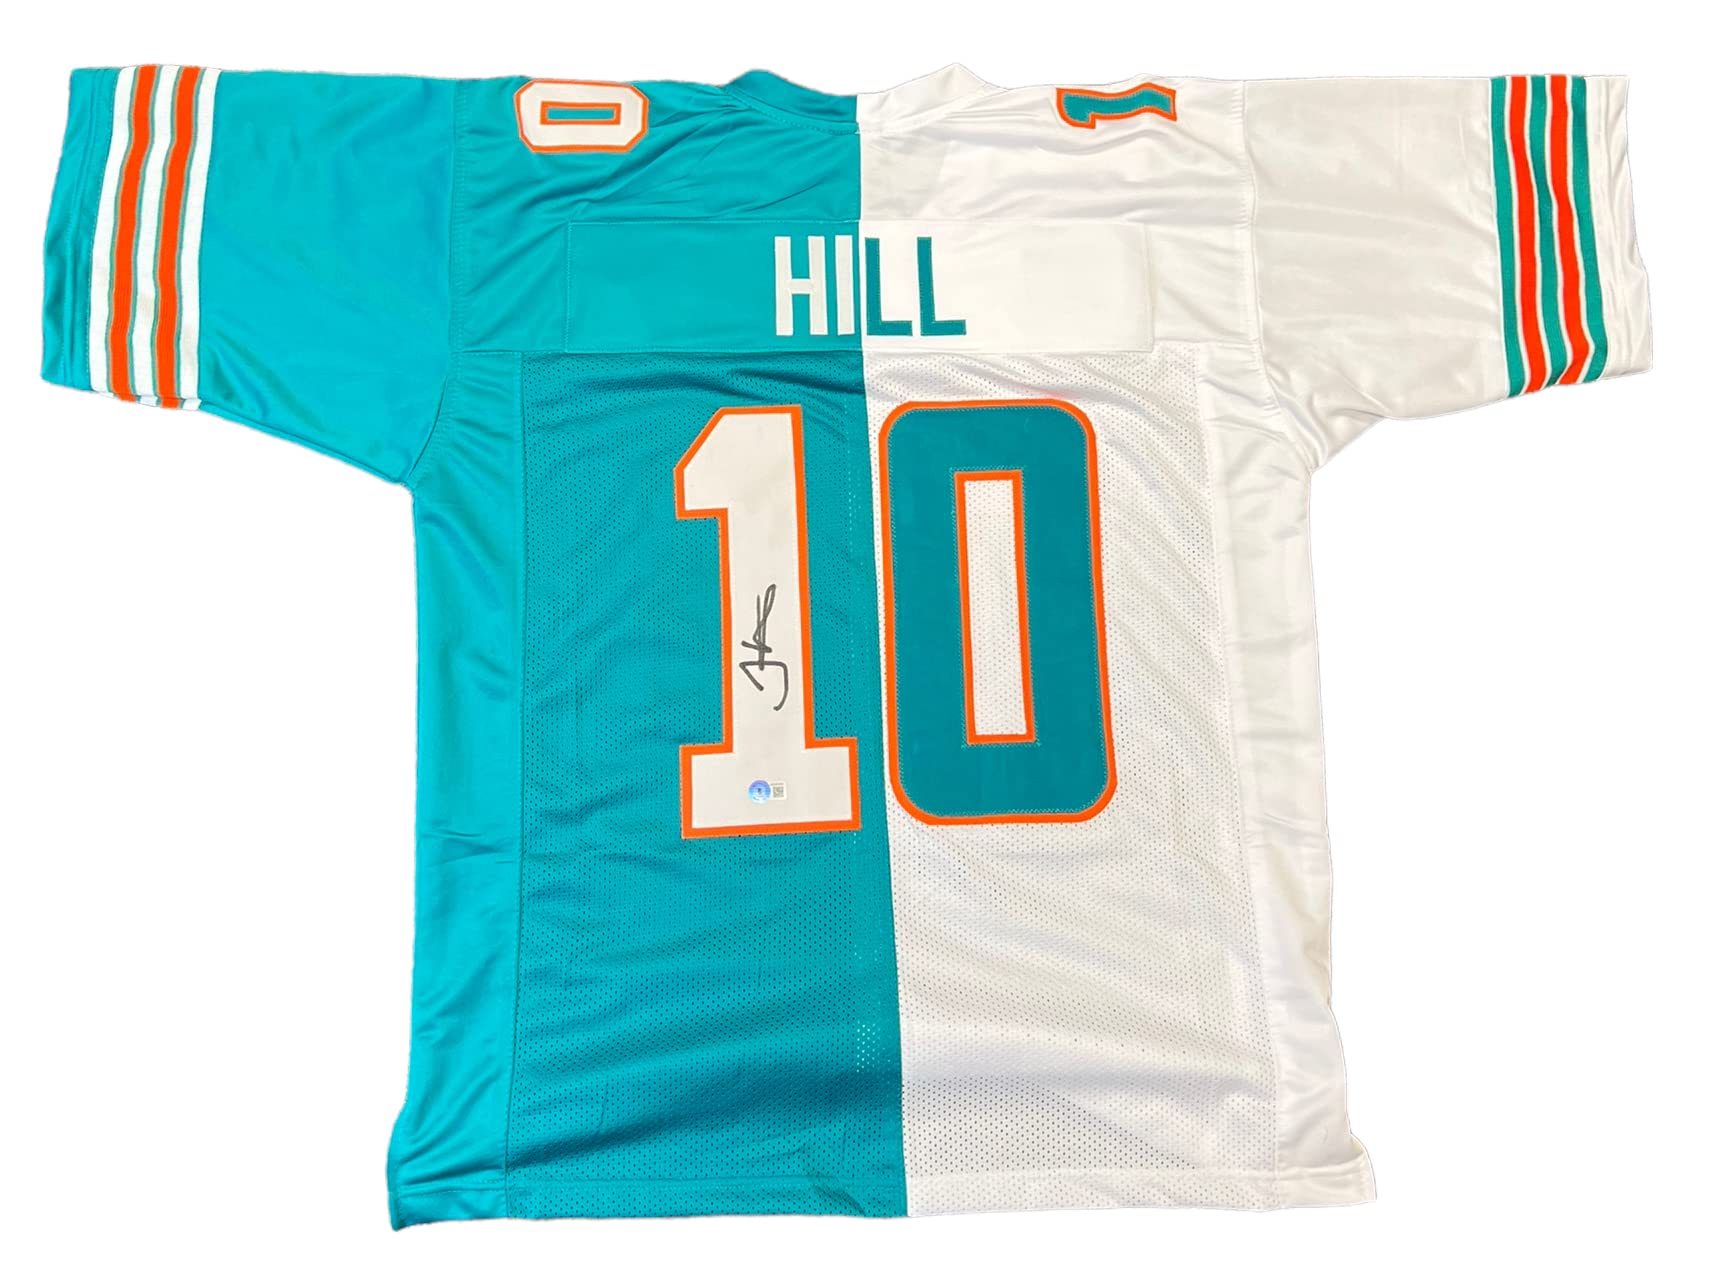 Tyreek Hill Miami Dolphins Signed Autograph Jersey HALF & HALF